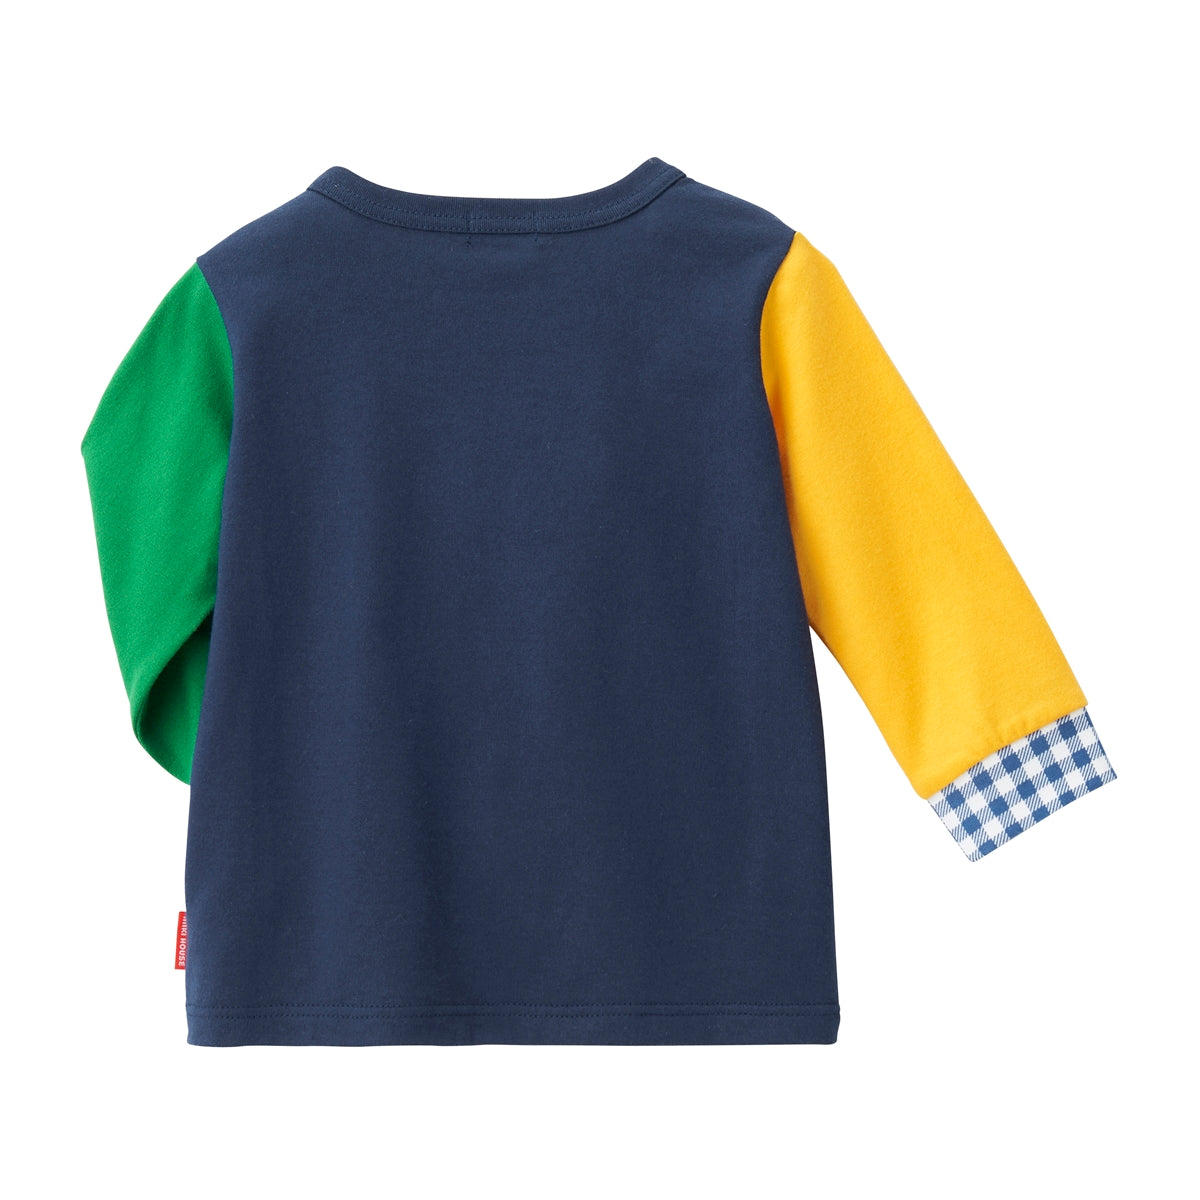 Pucchi-in-Overalls Long Sleeve Tee